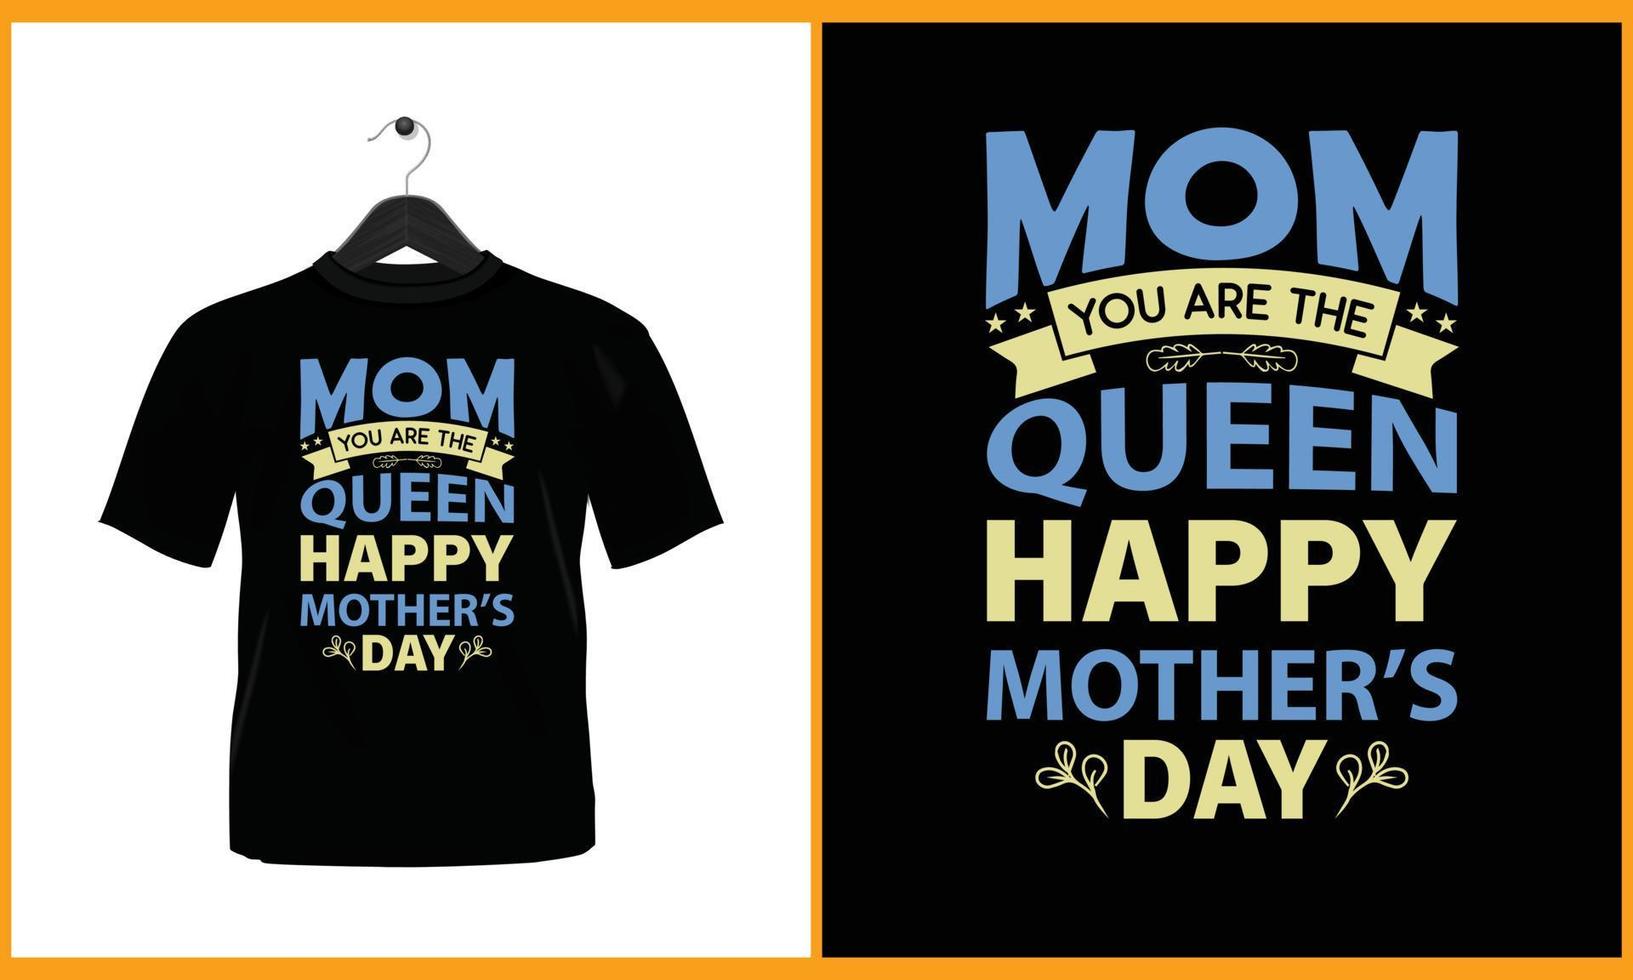 Mom you are the queen happy mother's day - T Shirt vector